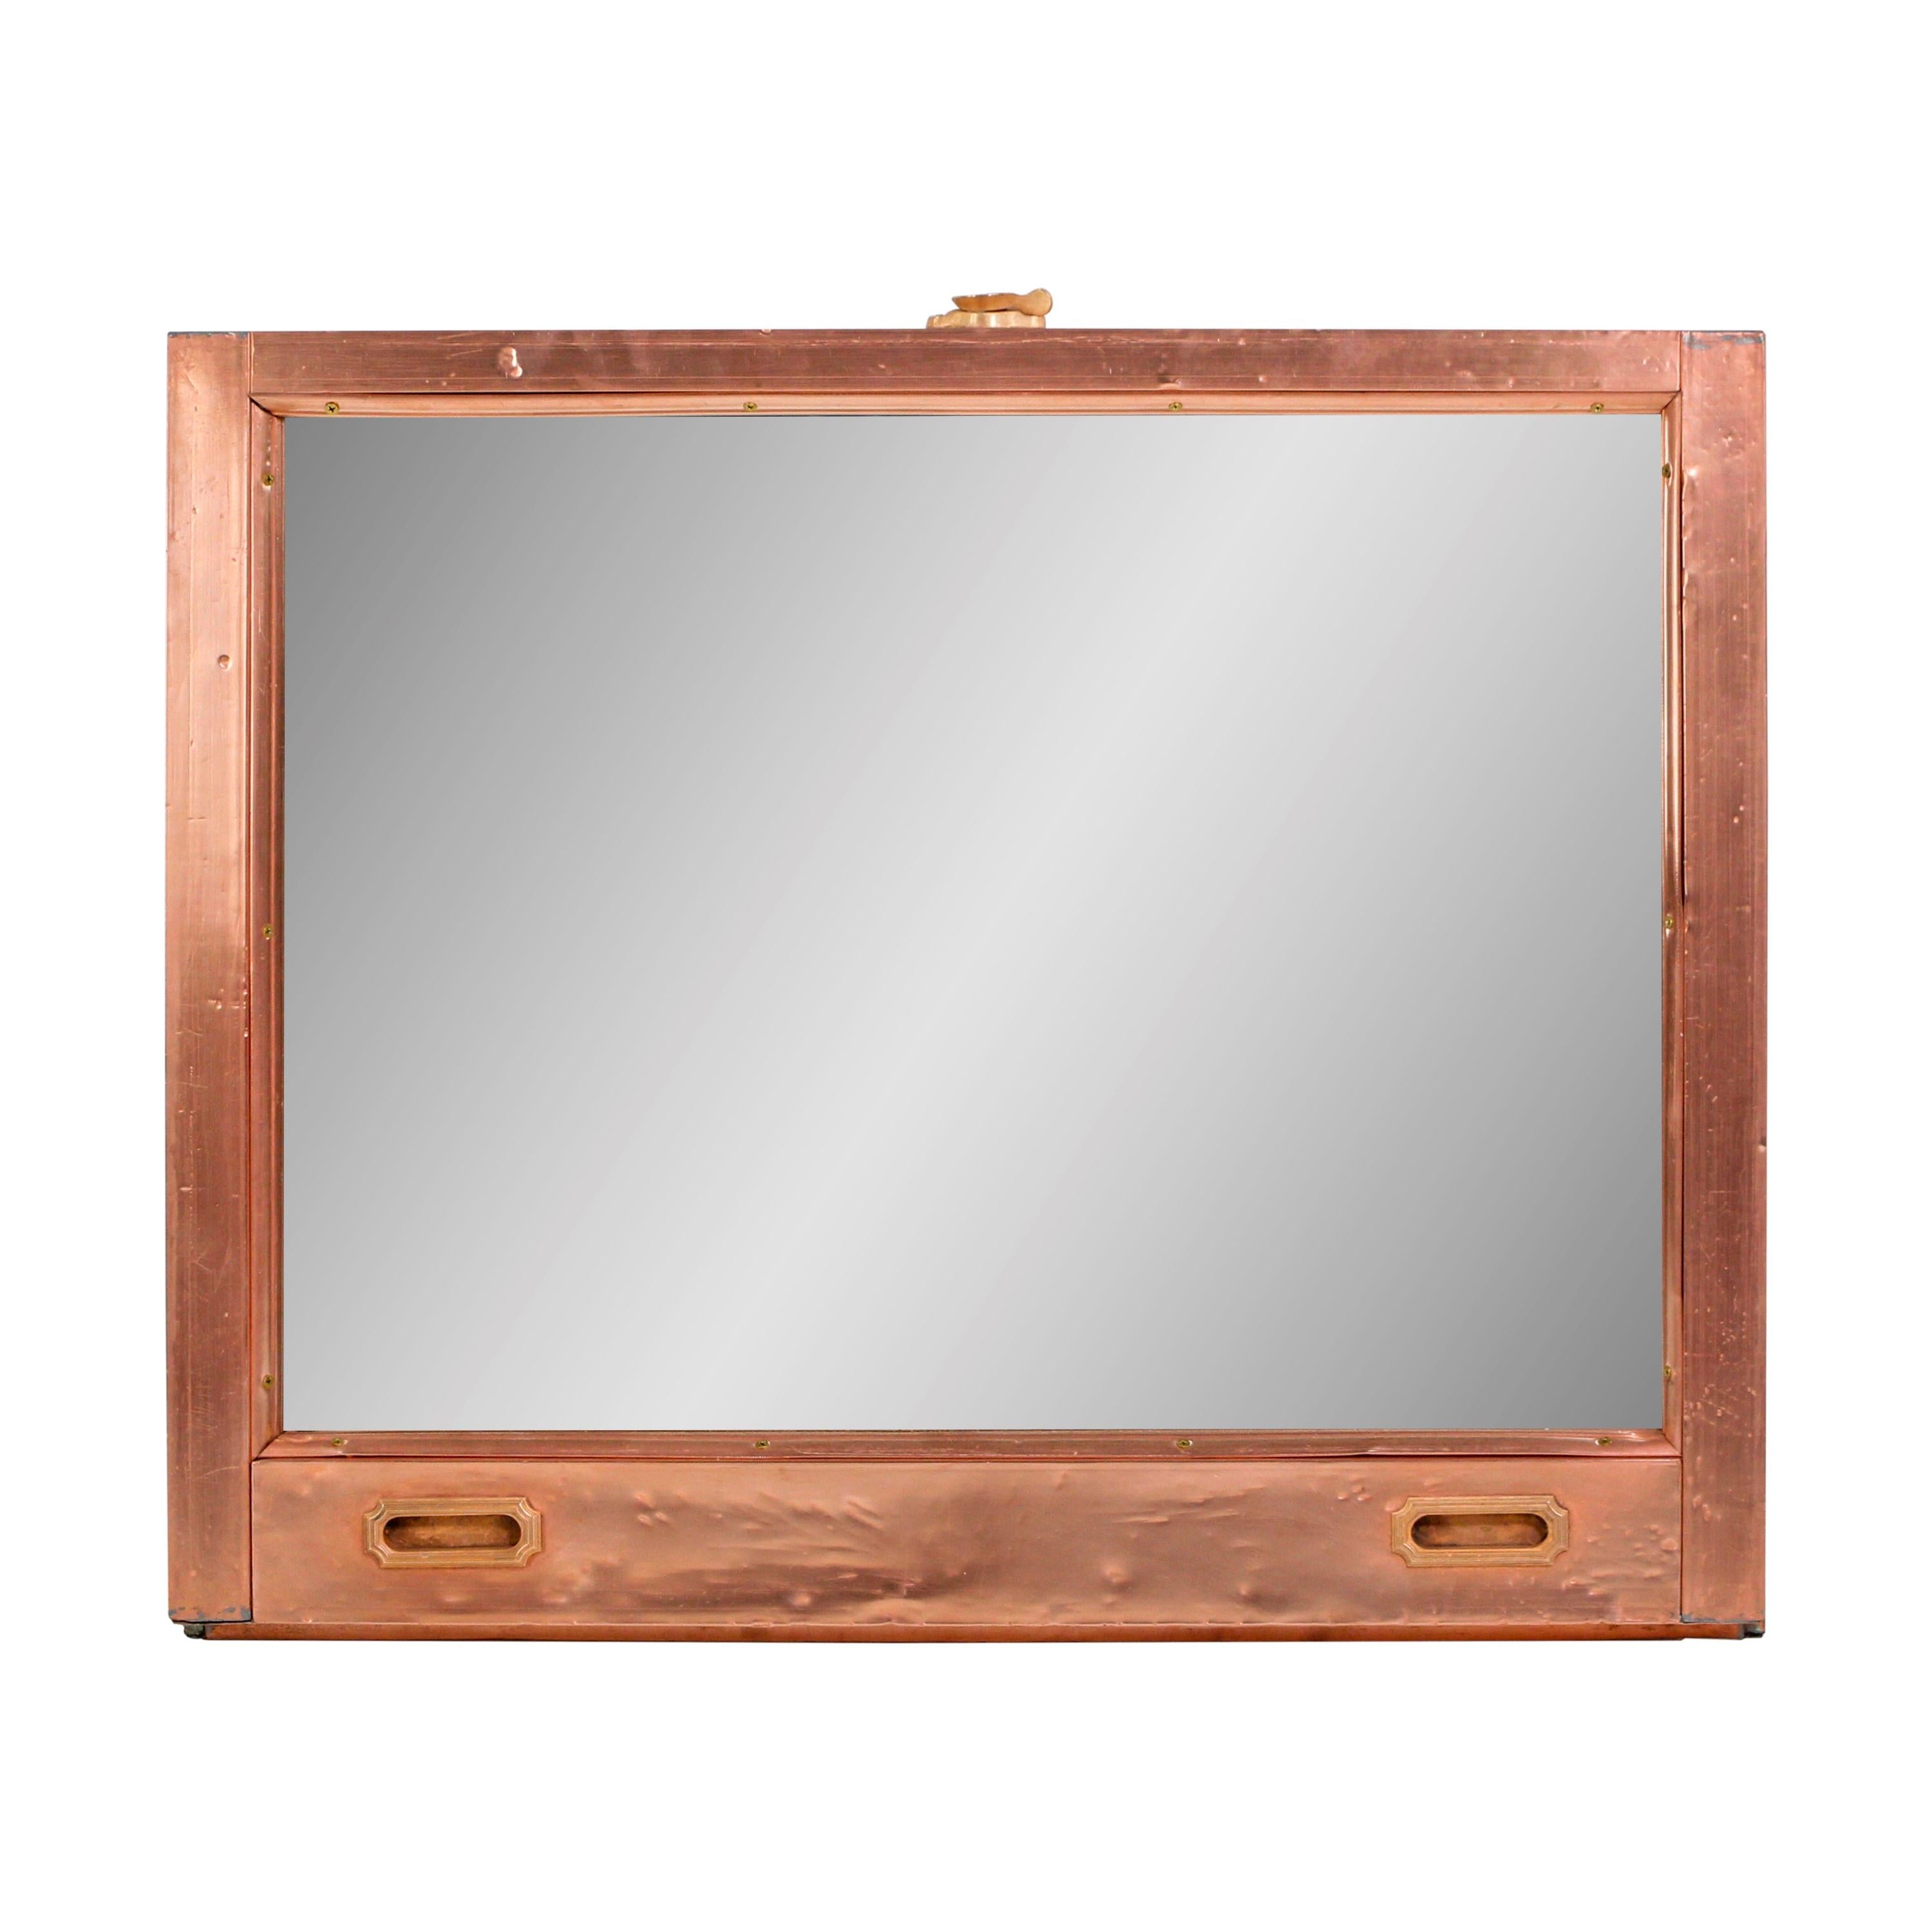 An actual 1912 copper clad wood window from the Hotel McAlpin at Broadway and East 34th St in Manhattan, NYC. Cleaned and polished with new mirror installed. Mounting cable on back. Please note, this item is located in our Scranton, PA location.